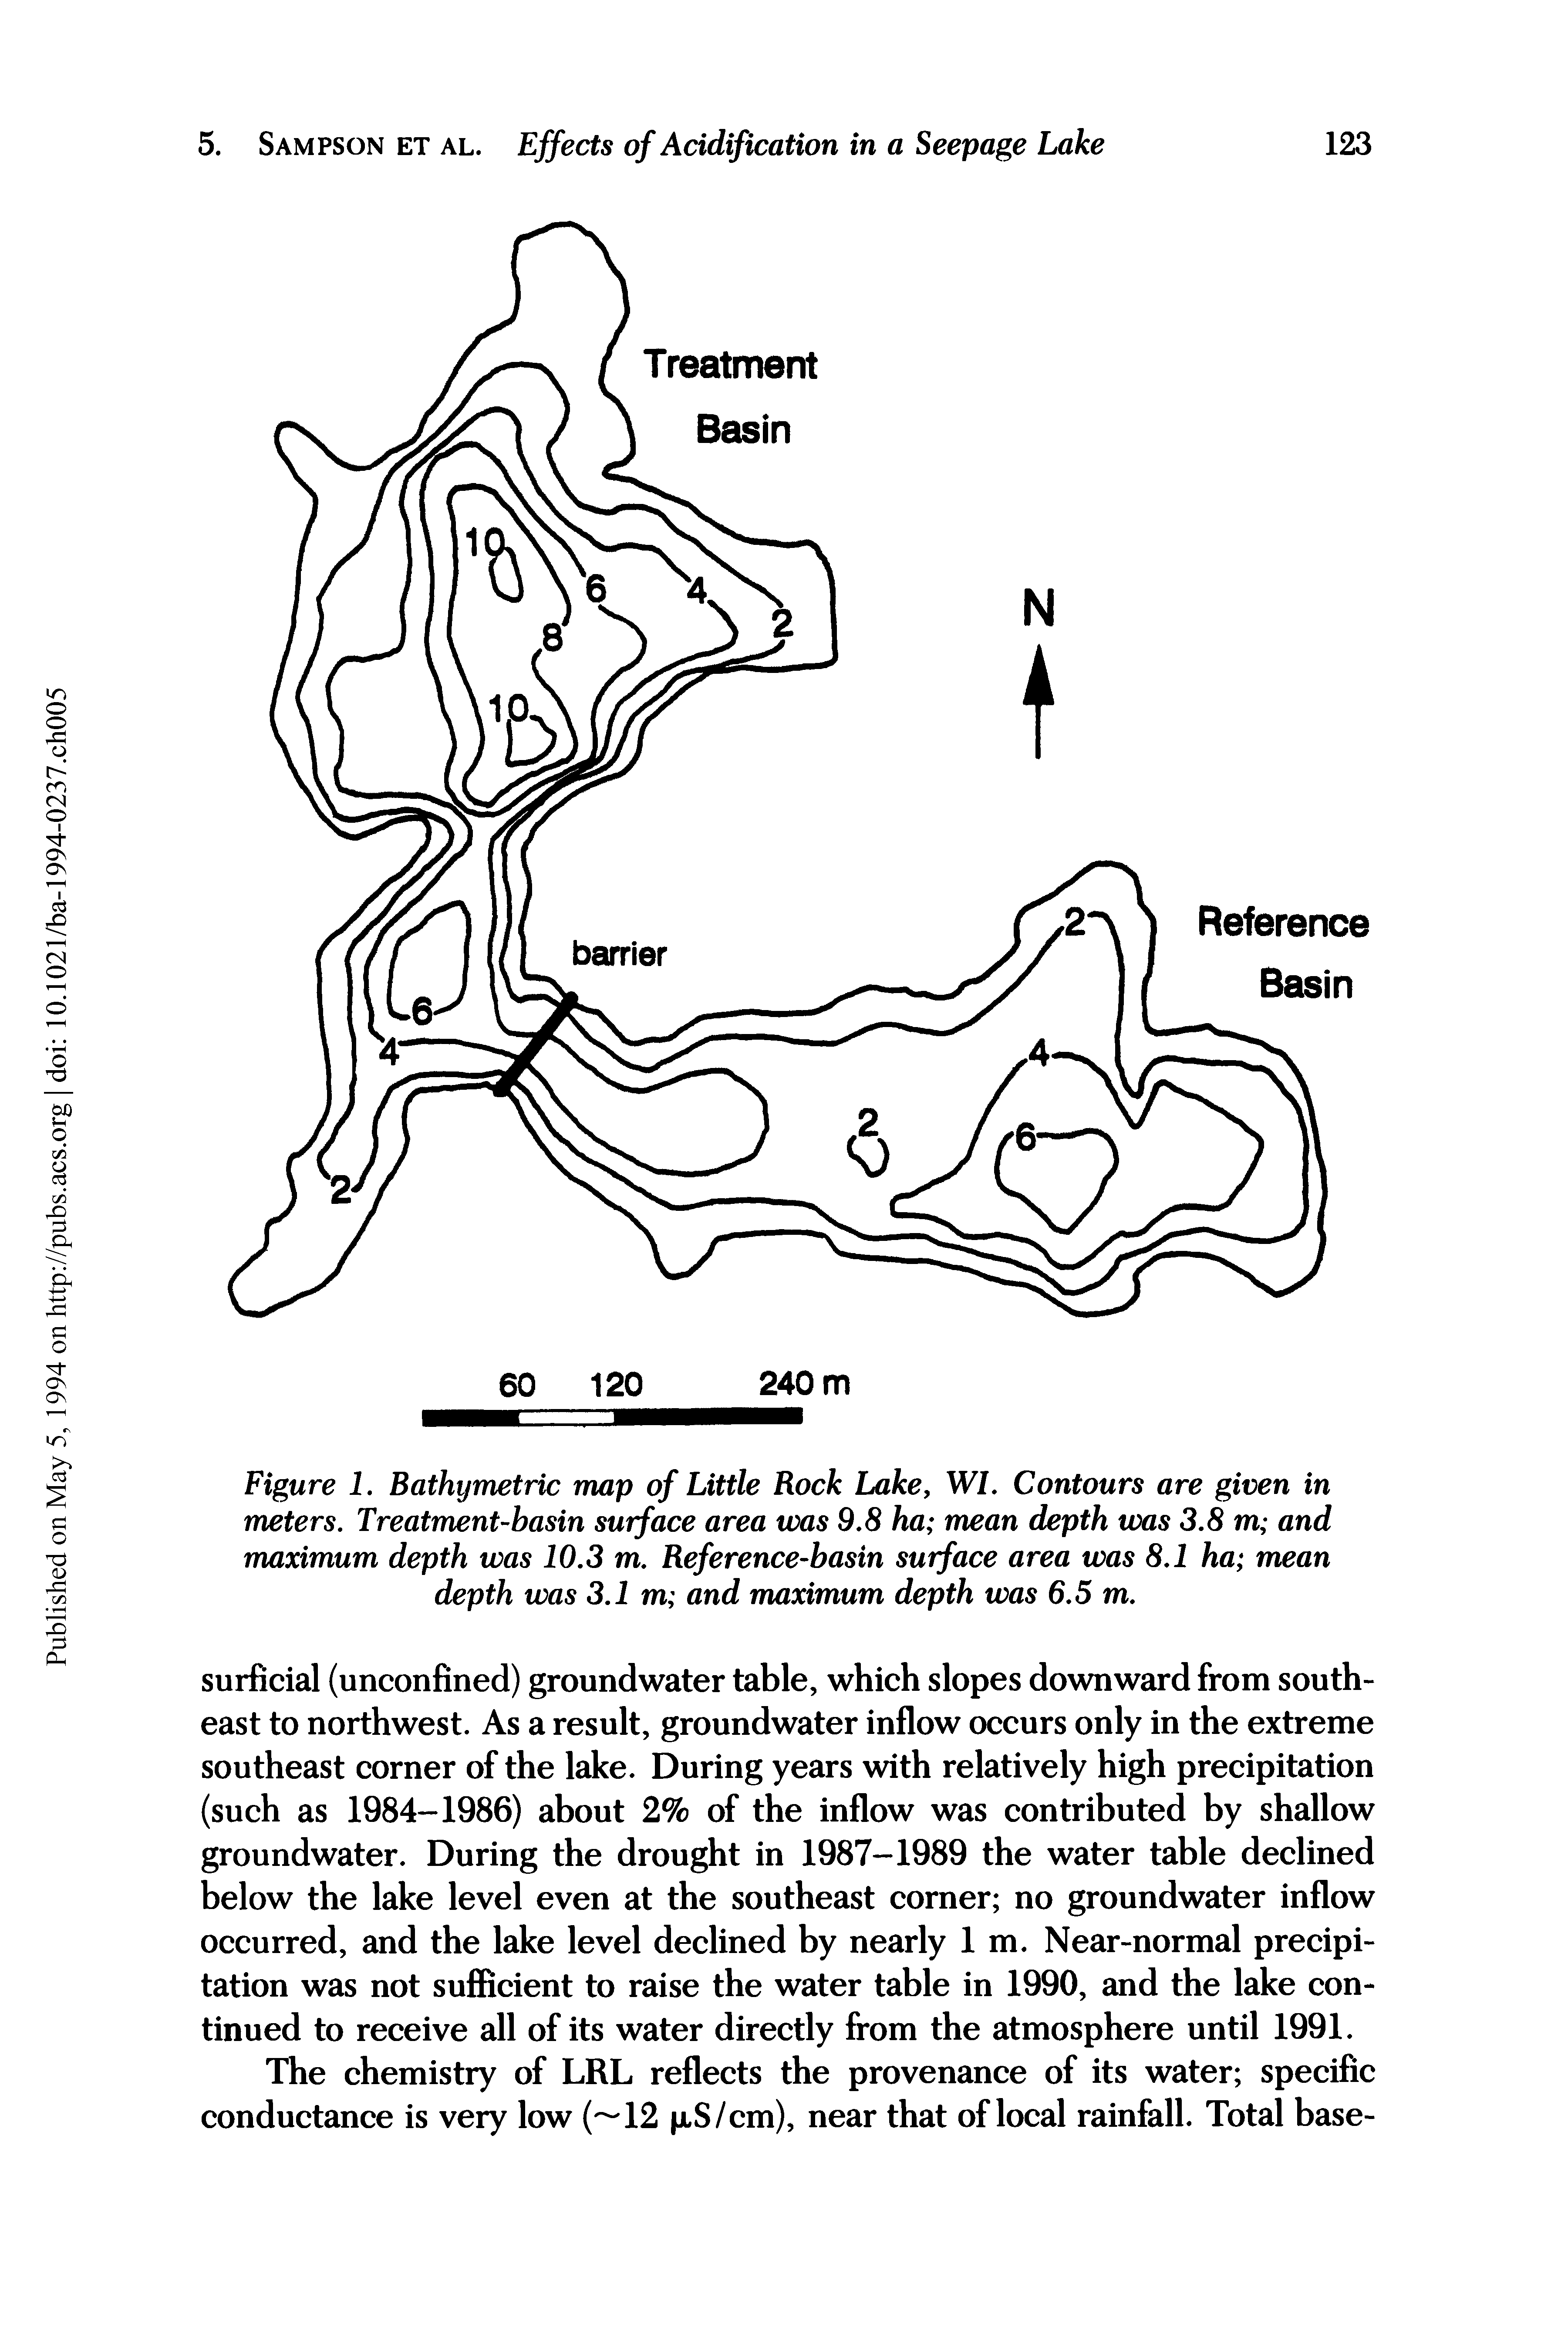 Figure 1. Bathymetric map of Little Rock Lake, WL Contours are given in meters. Treatment-basin surface area was 9.8 ha mean depth was 3.8 m and maximum depth was 10.3 m. Reference-basin surface area was 8.1 ha mean depth was 3.1 m and maximum depth was 6.5 m.